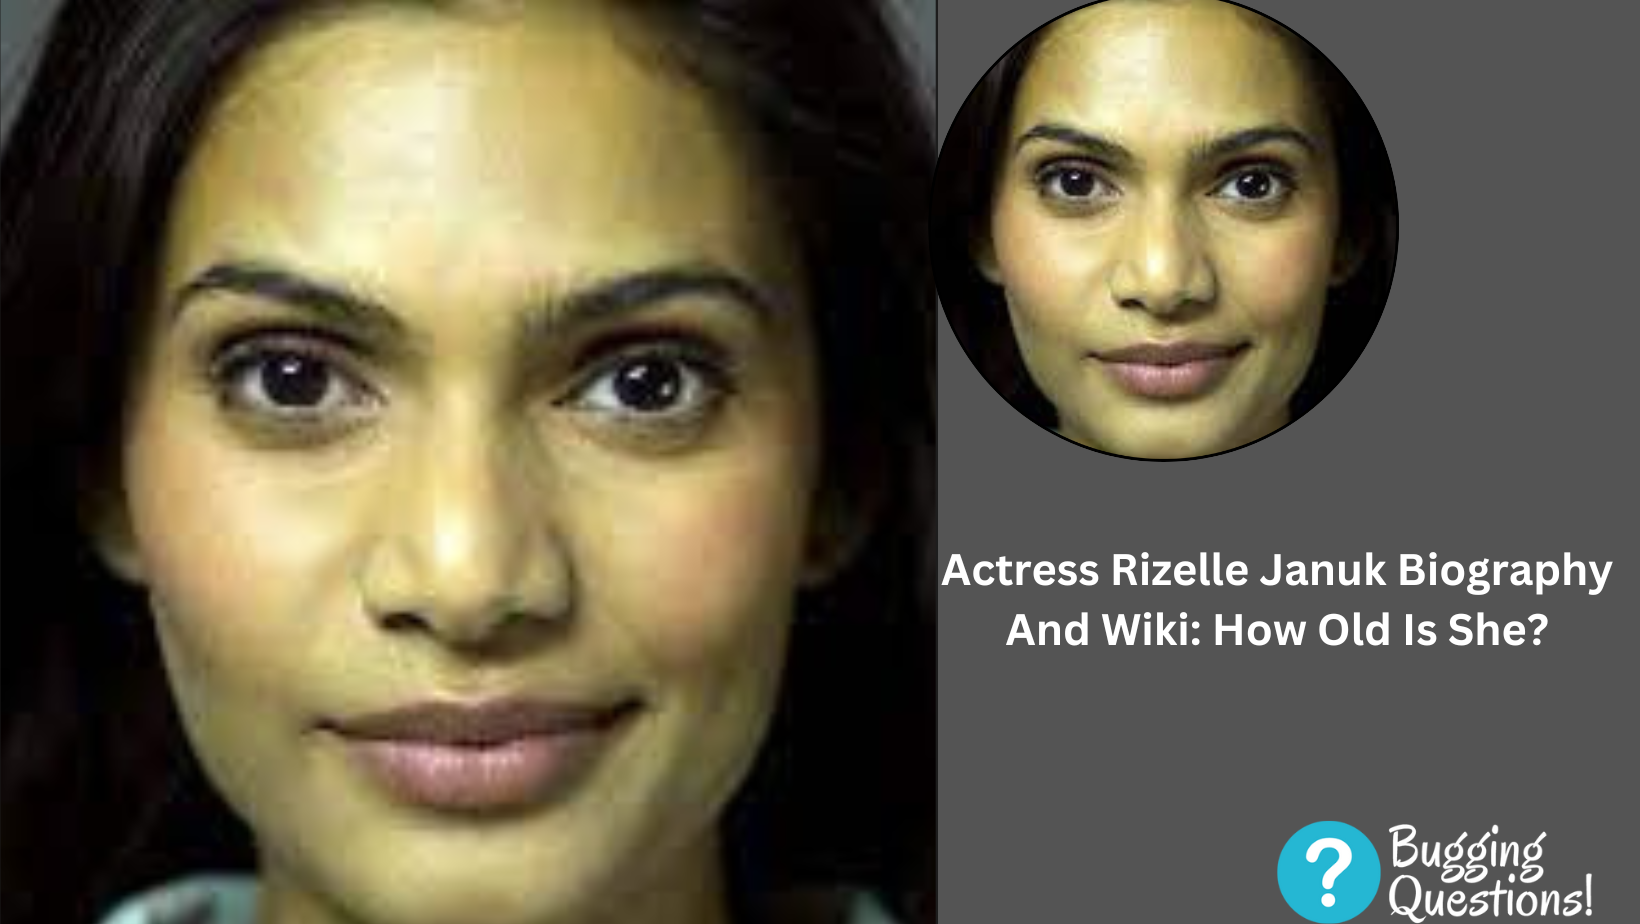 Actress Rizelle Januk Biography And Wiki: How Old Is She?